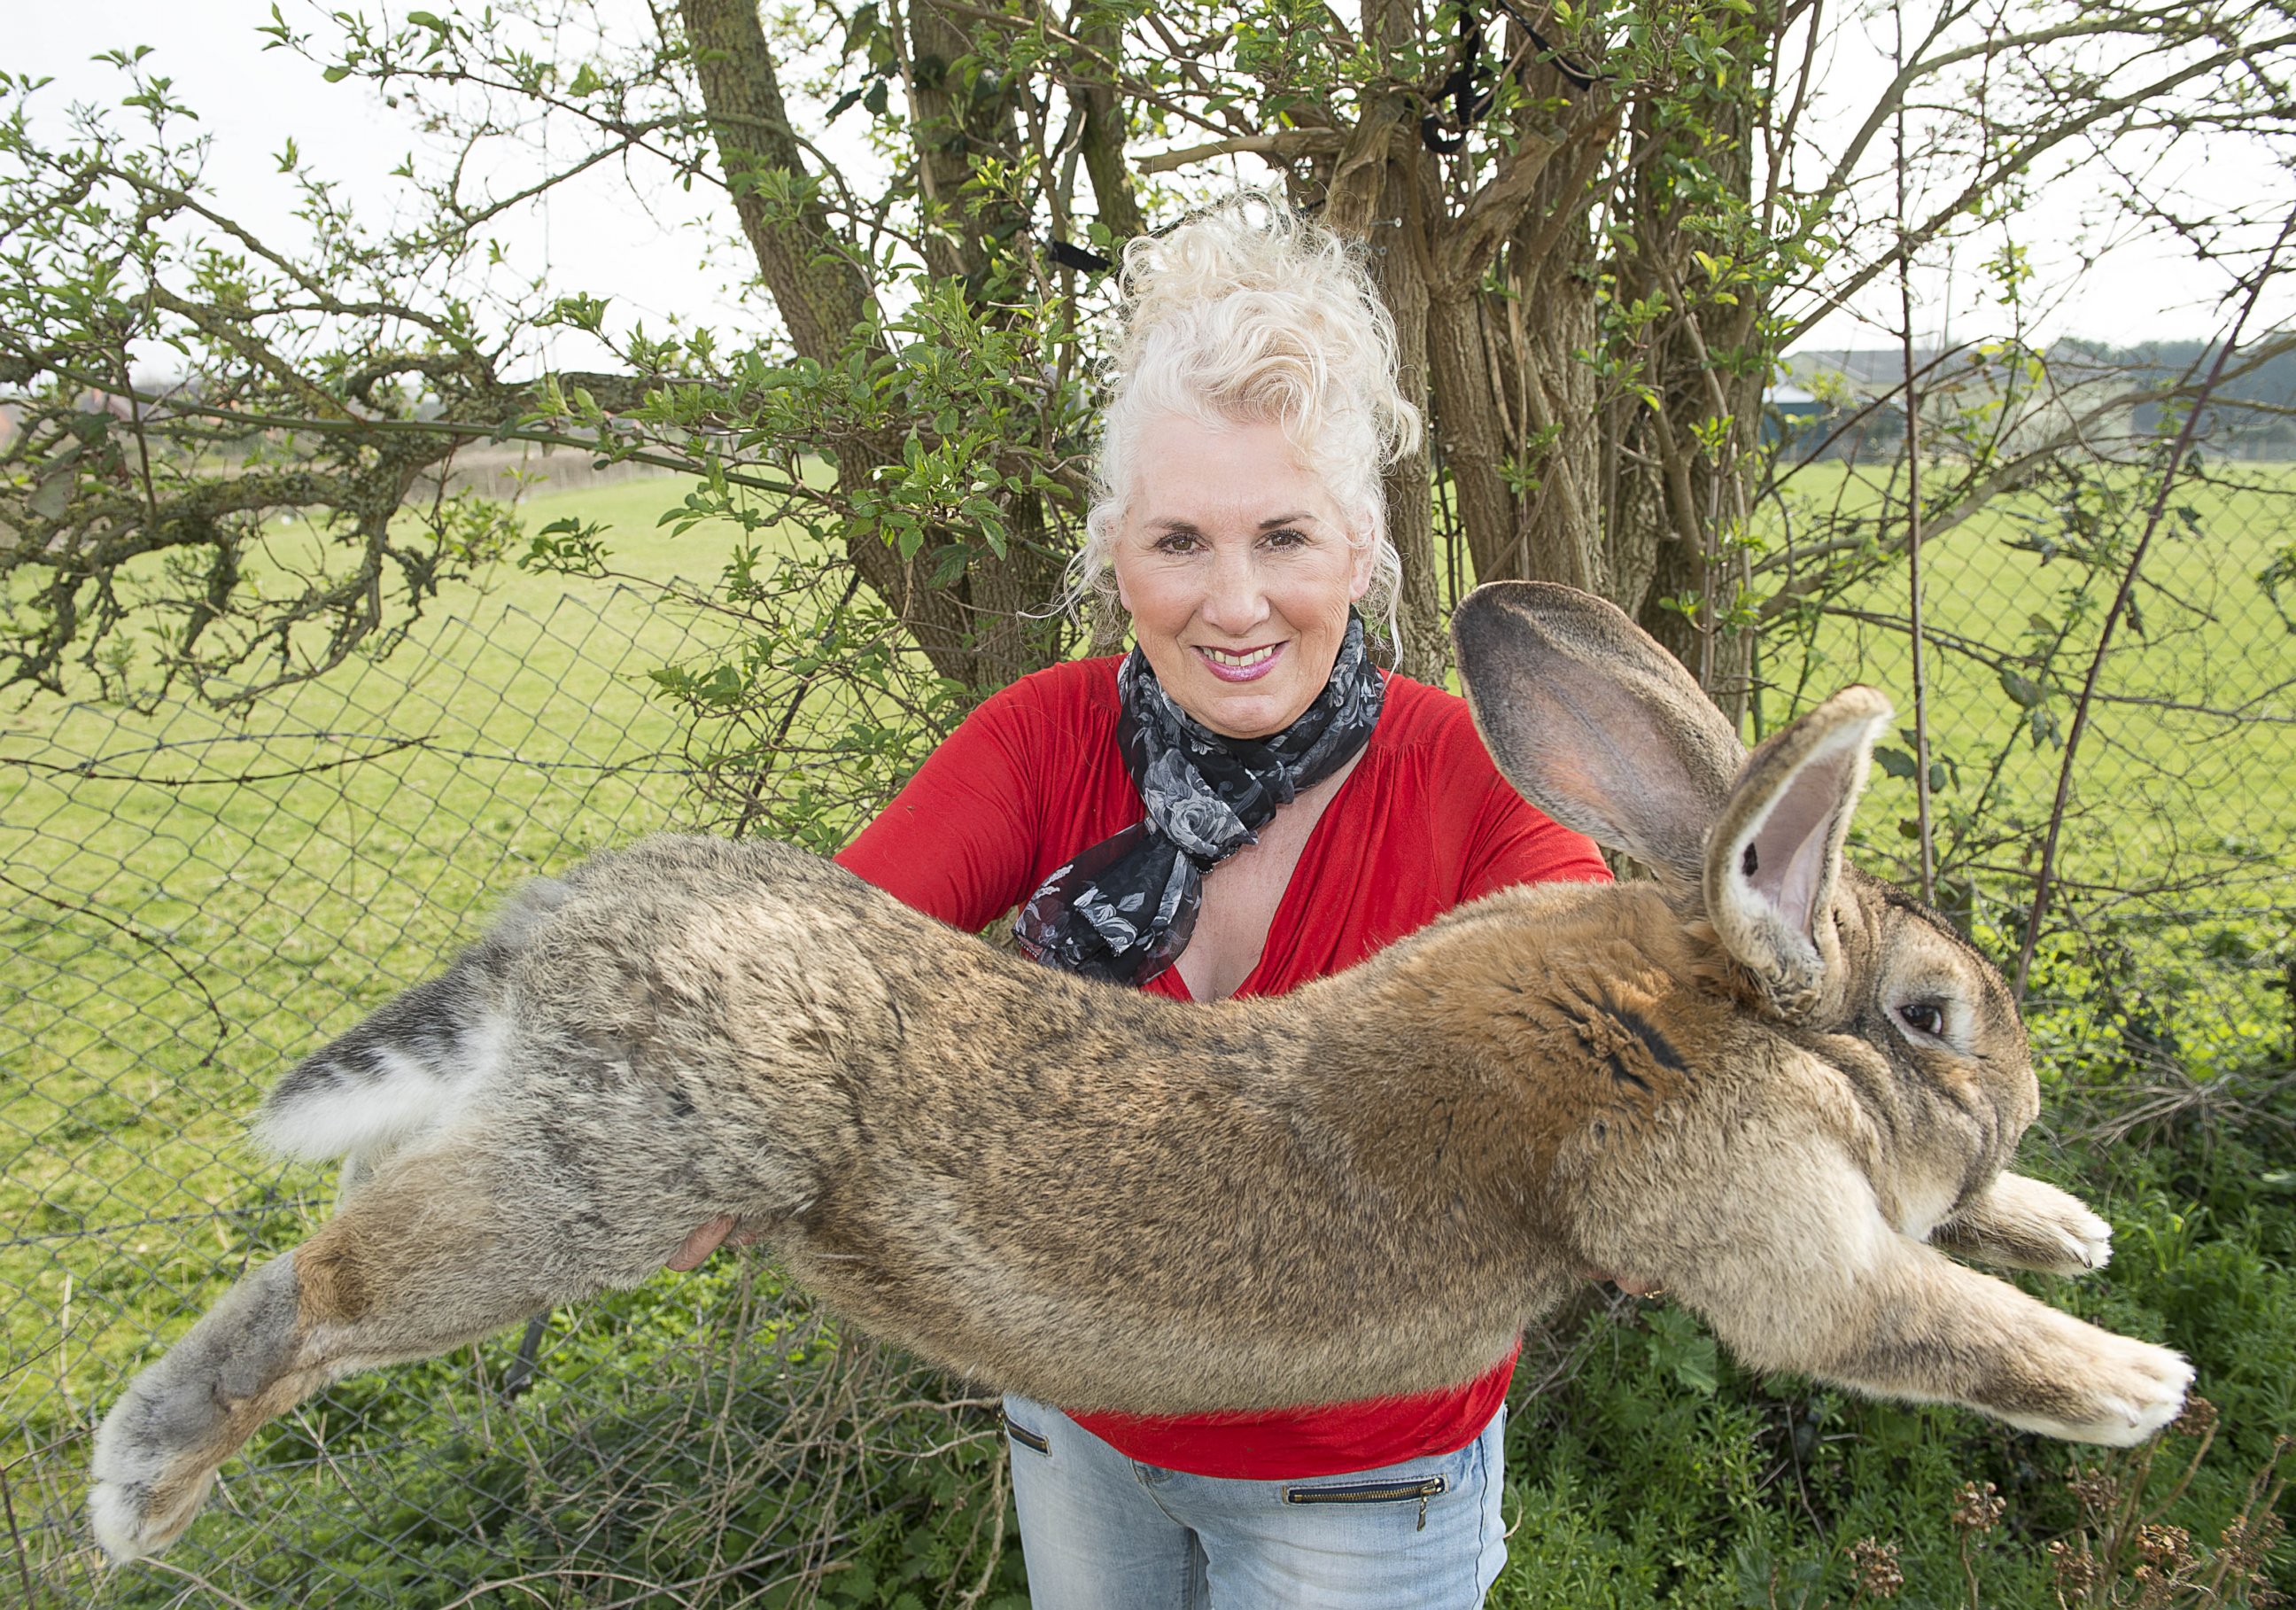 PHOTO: Annette Edwards from Stoulton Worcestershire, who has a champion giant rabbit Darius, on April 9, 2015. 